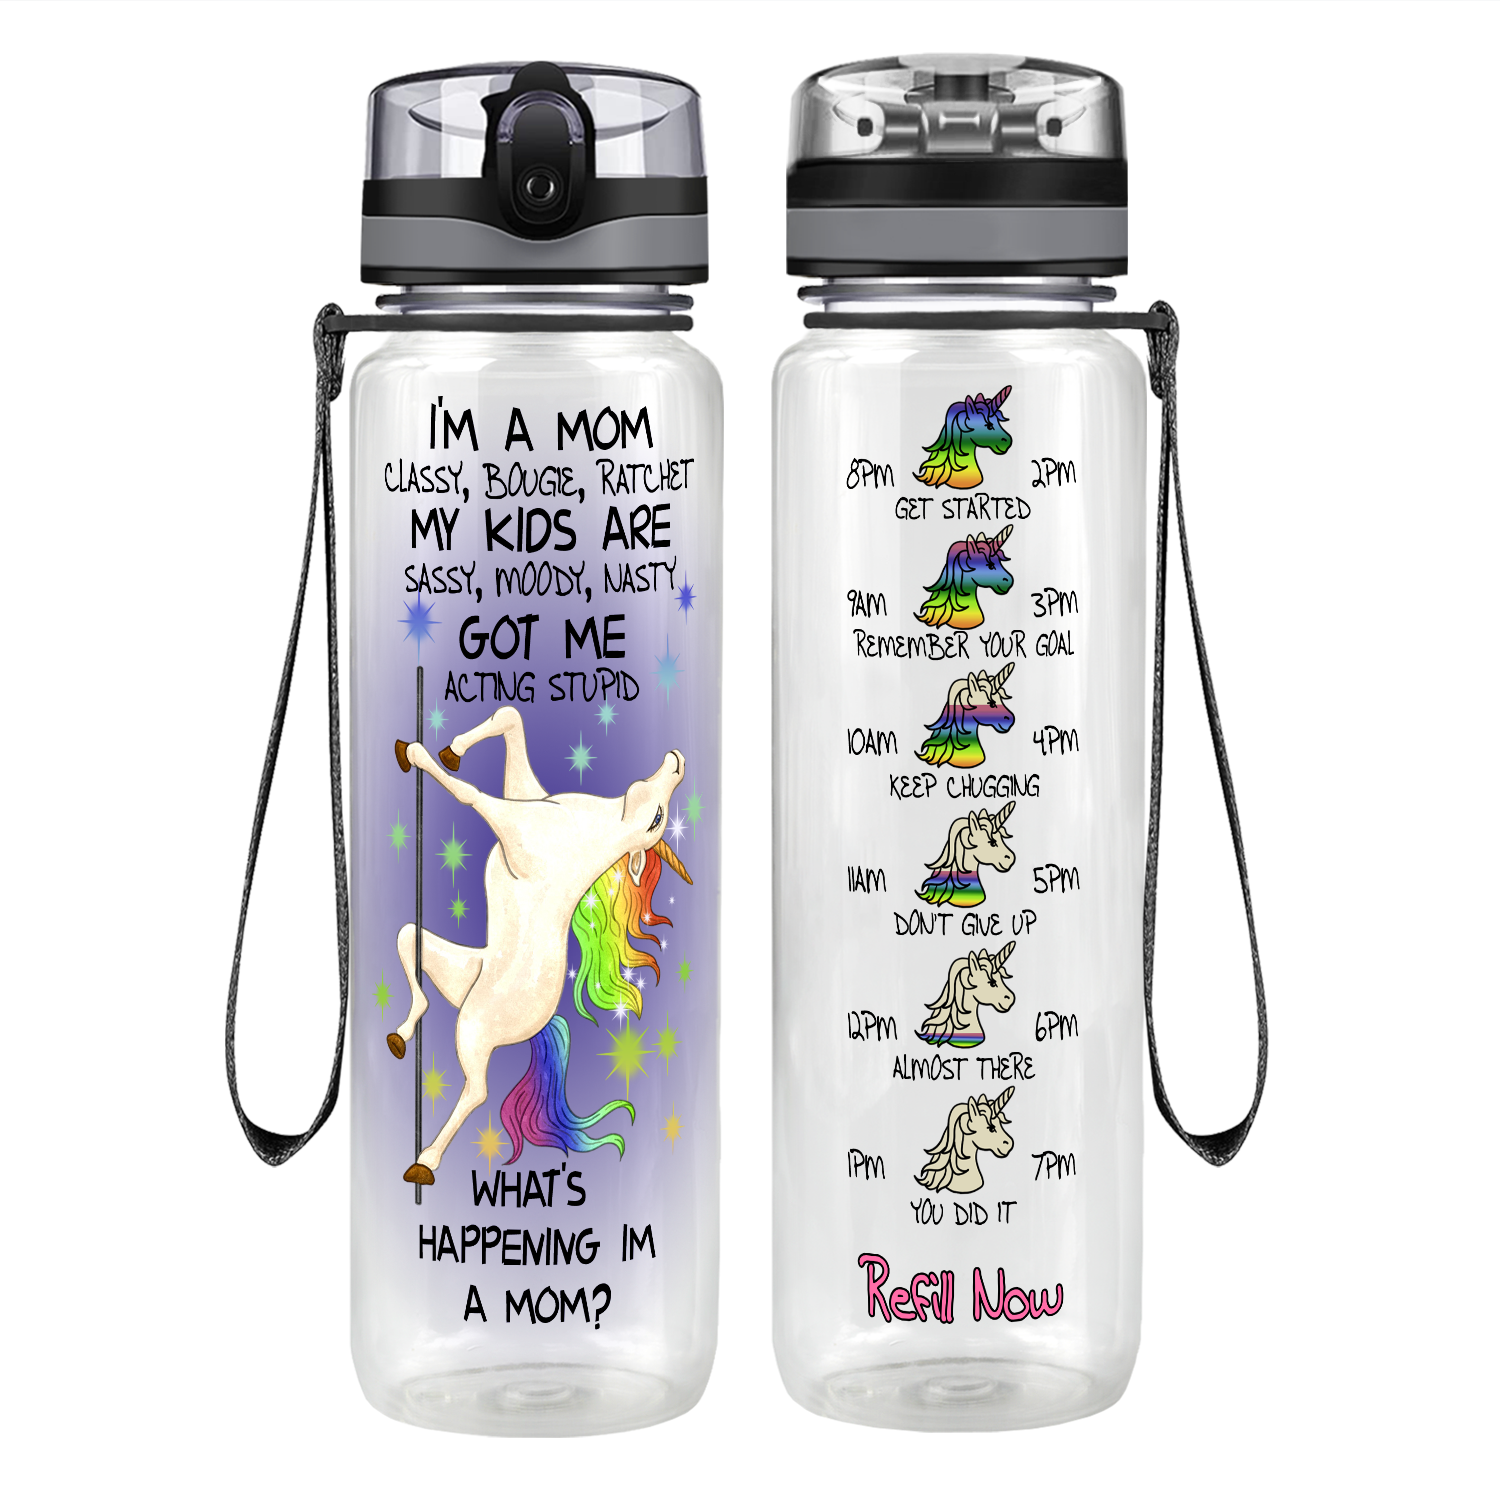 I'm A Mom Classy, Bougie, Ratchet Motivational Tracking Water Bottle